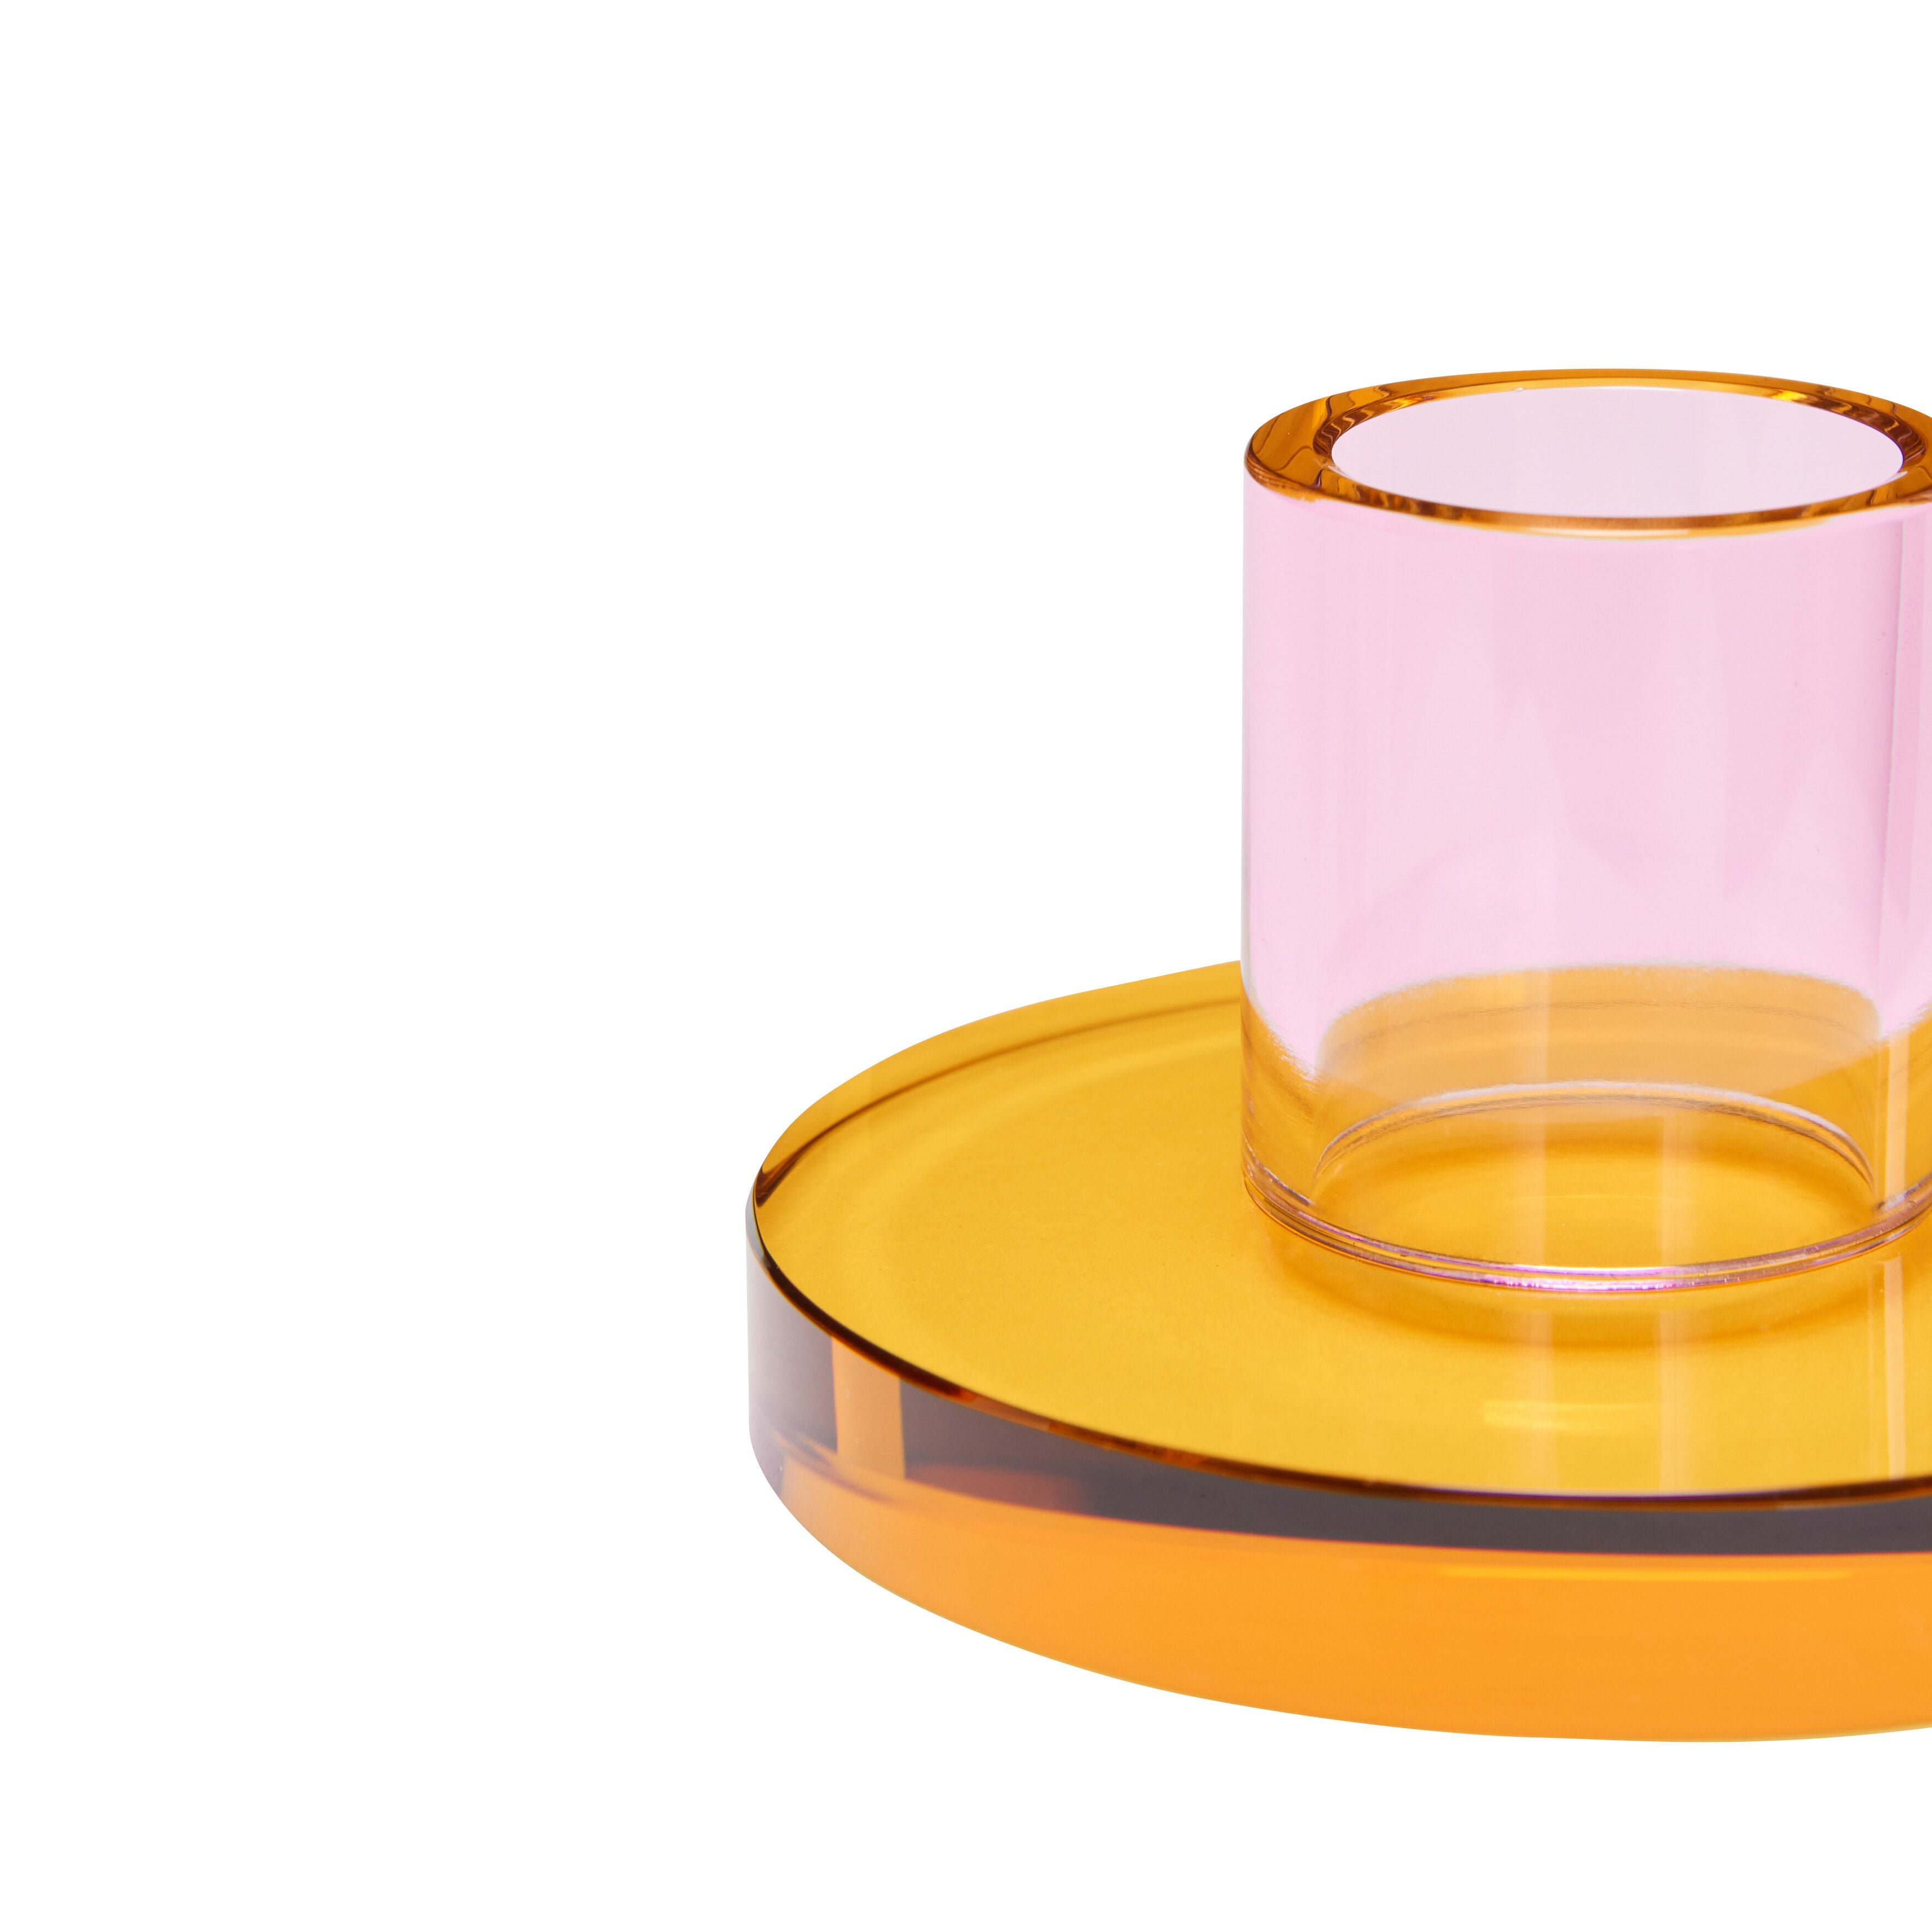 Astra Candleholder Small in Pink, Orange